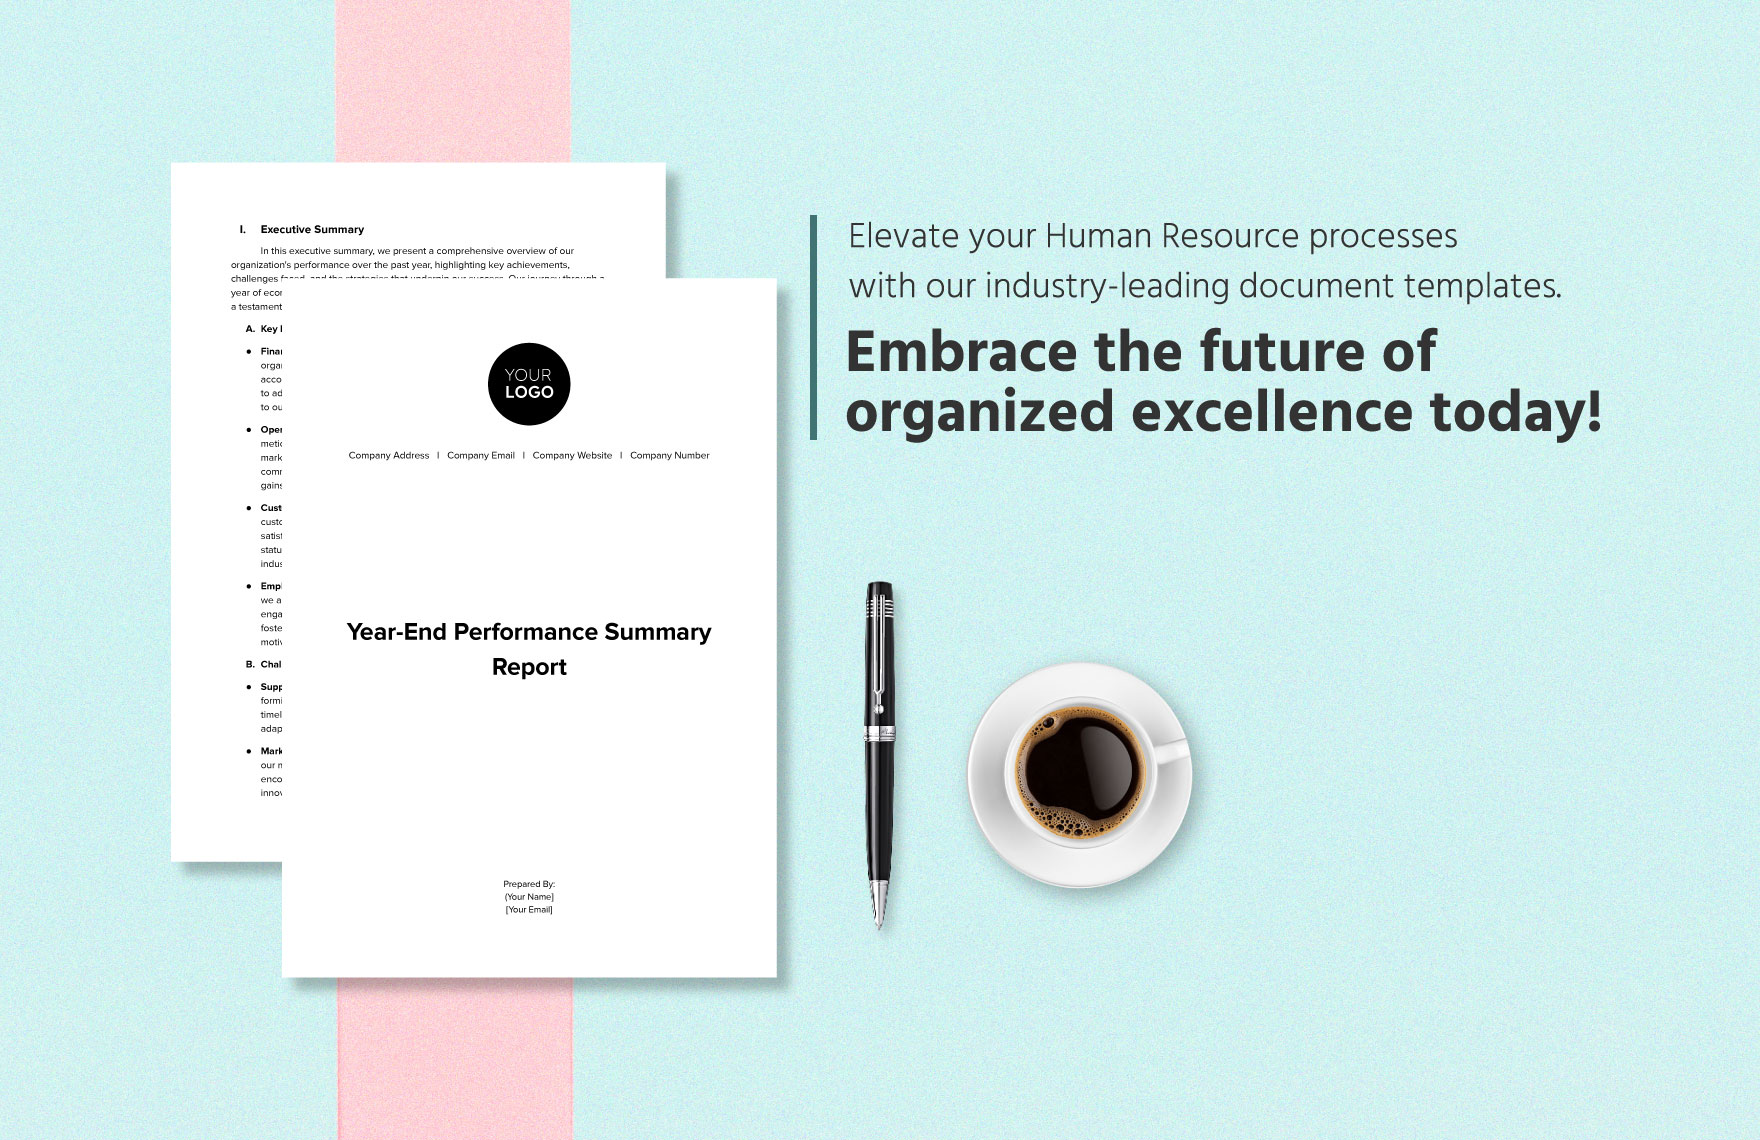 Year-End Performance Summary Report HR Template